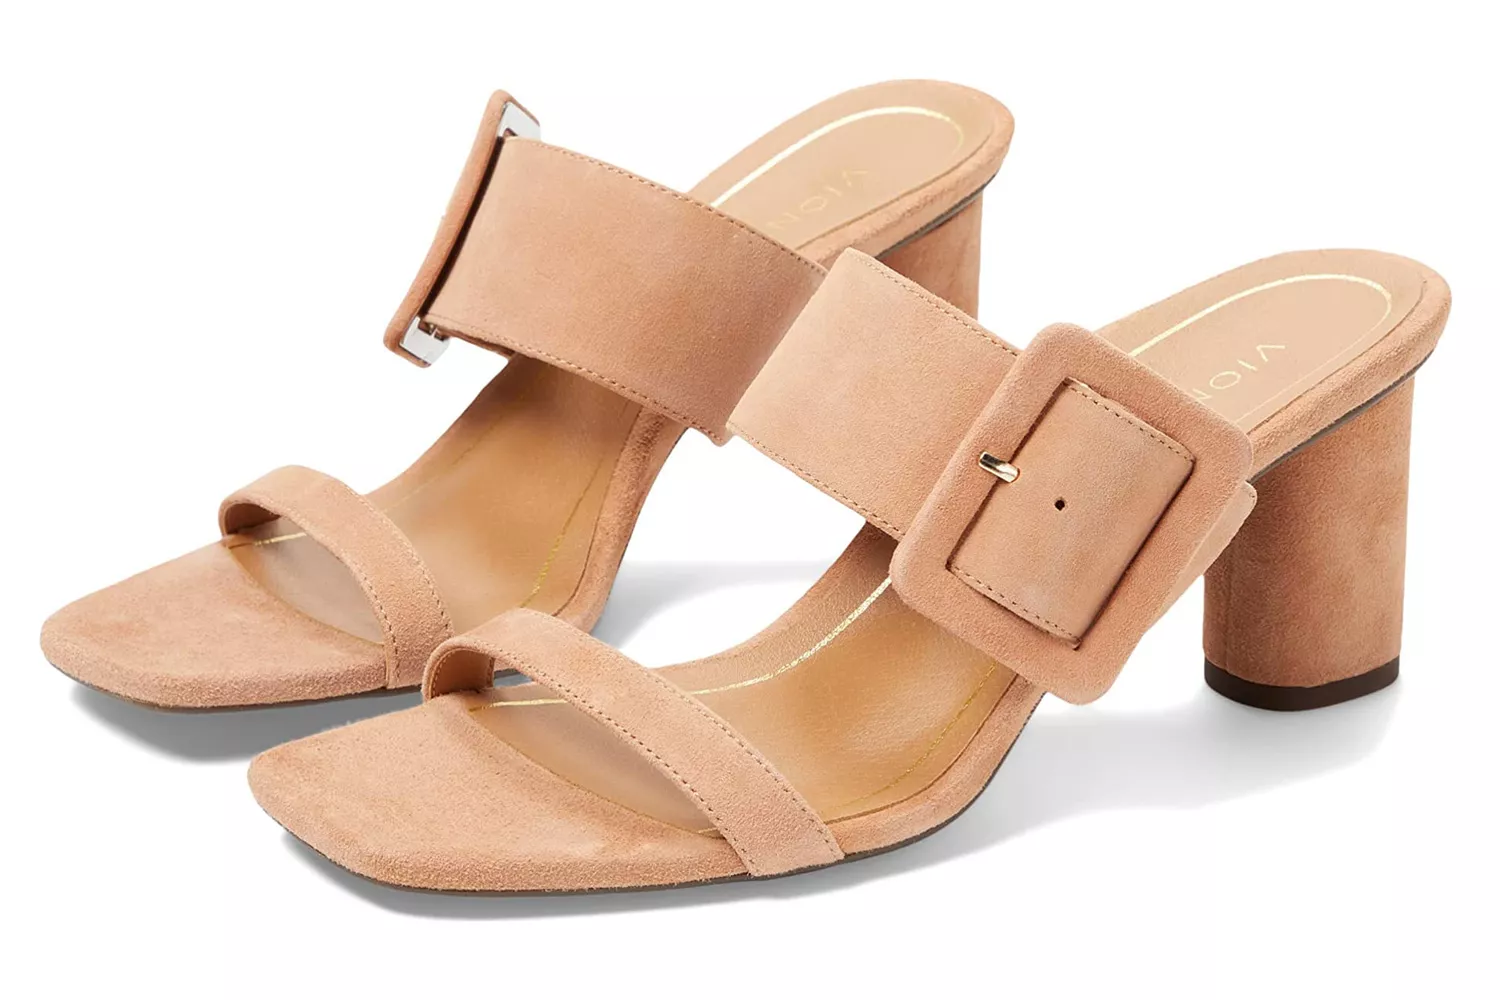 The Best Heeled Sandals: Vionic Brookell Buckle Strap Sandal